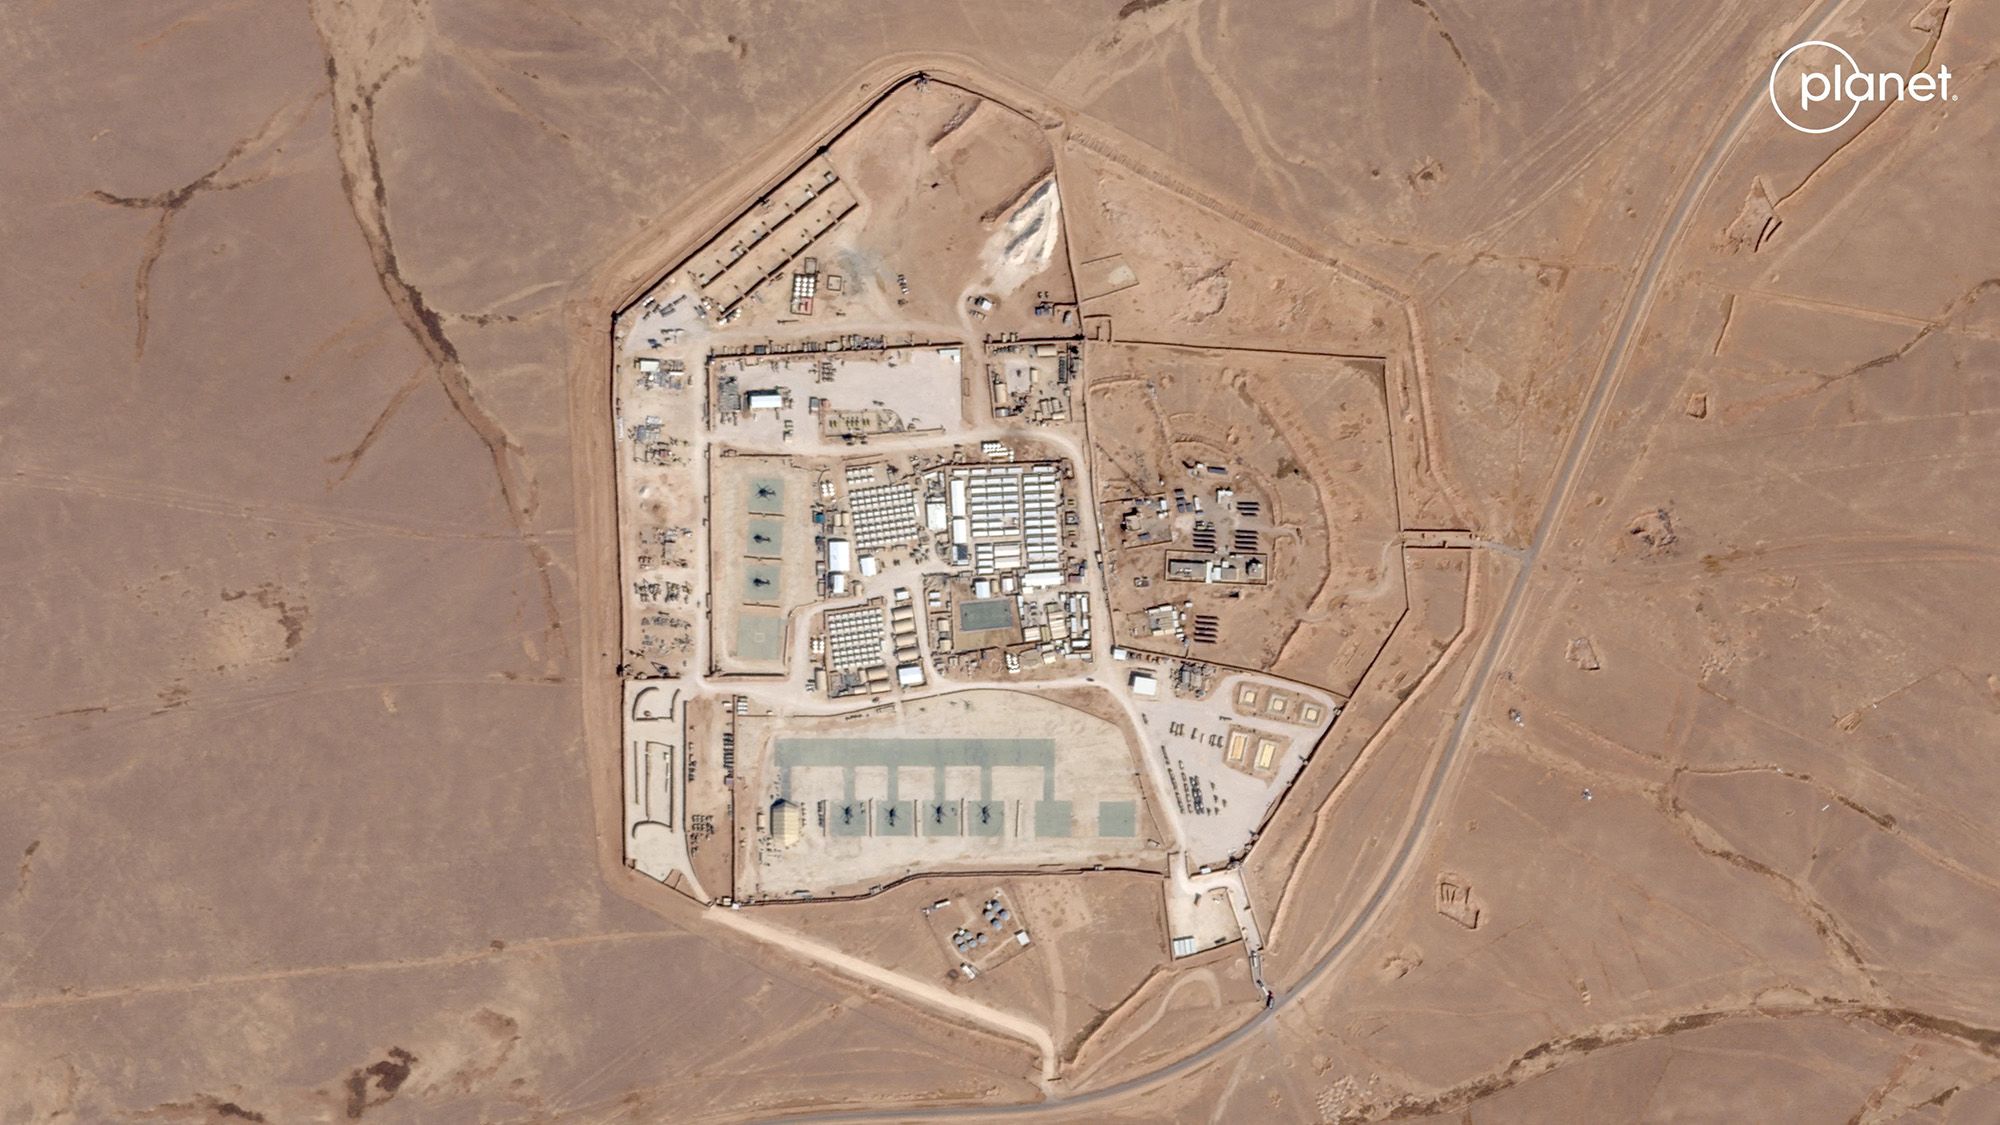 Pictured is satellite view of the U.S. military outpost known as Tower 22, in Rukban, Rwaished Dist...